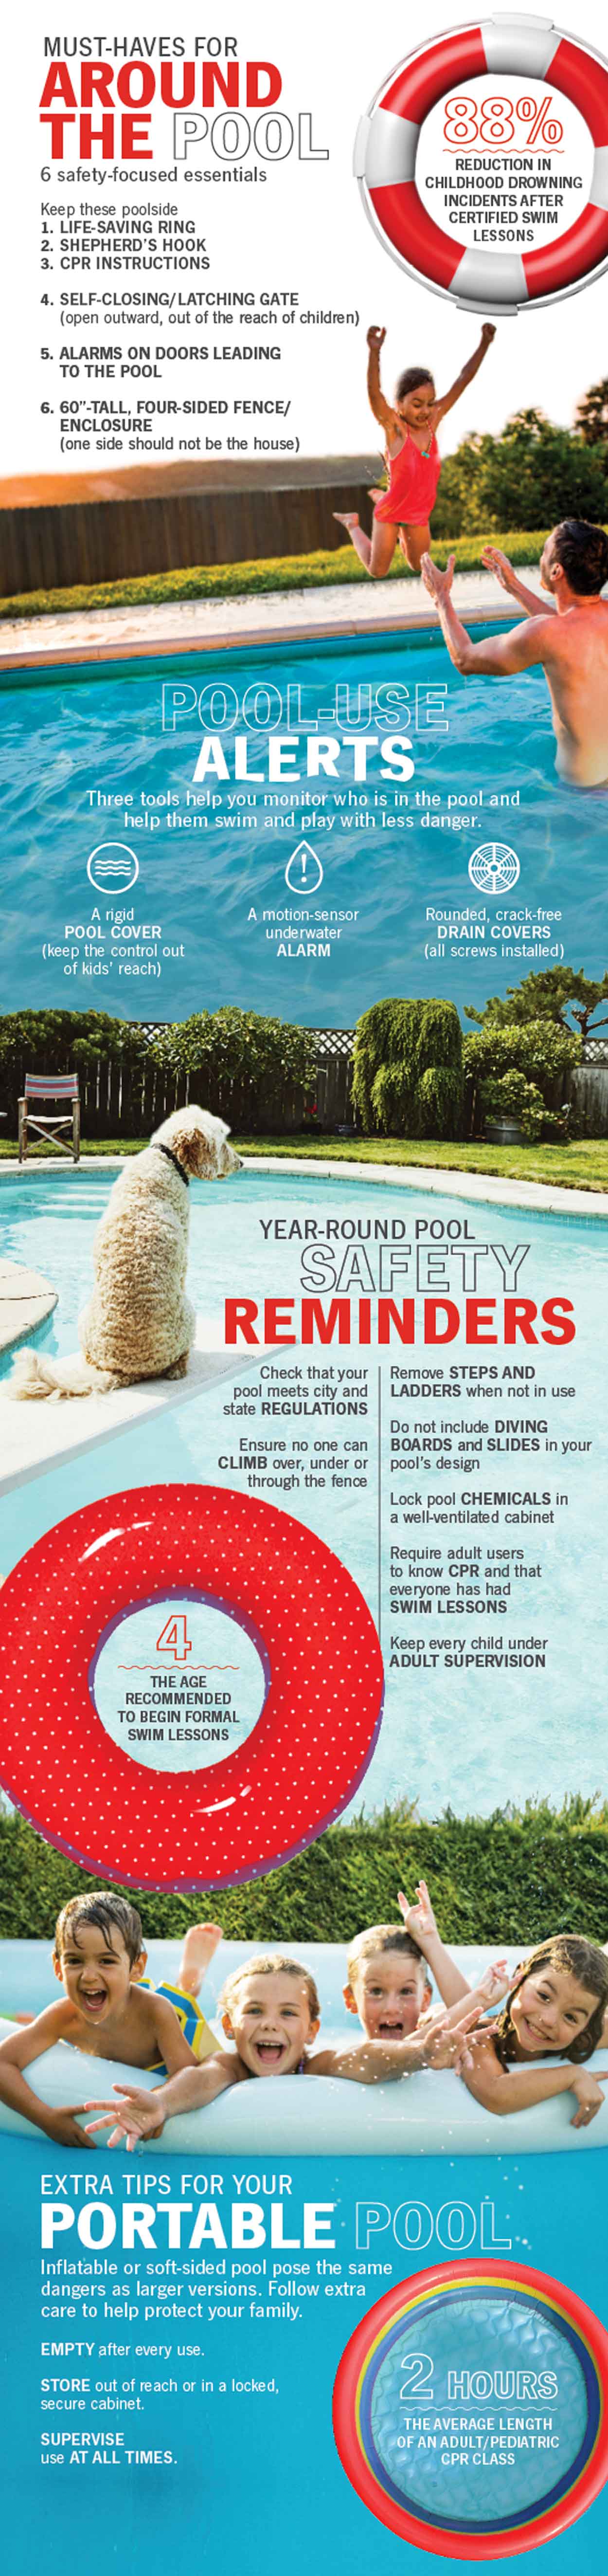 backyard-swimming-pool-safety-tips-infographic